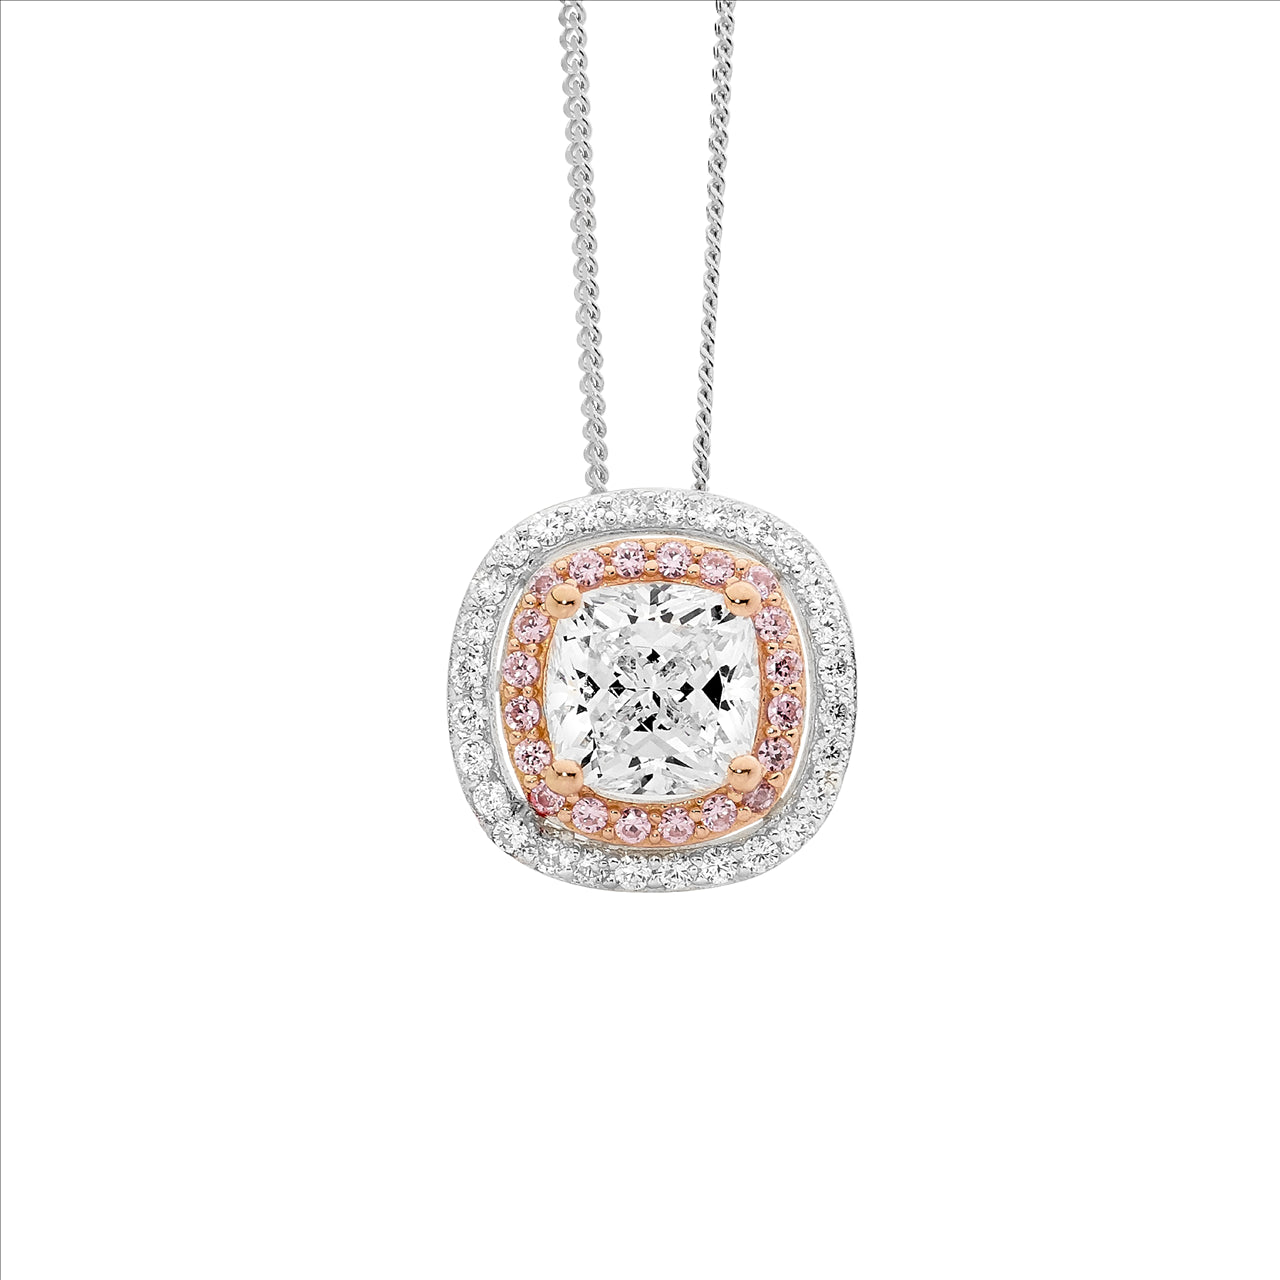 Cubic Zirconia Double Halo Necklace Sterling Silver and Rose Gold Plating